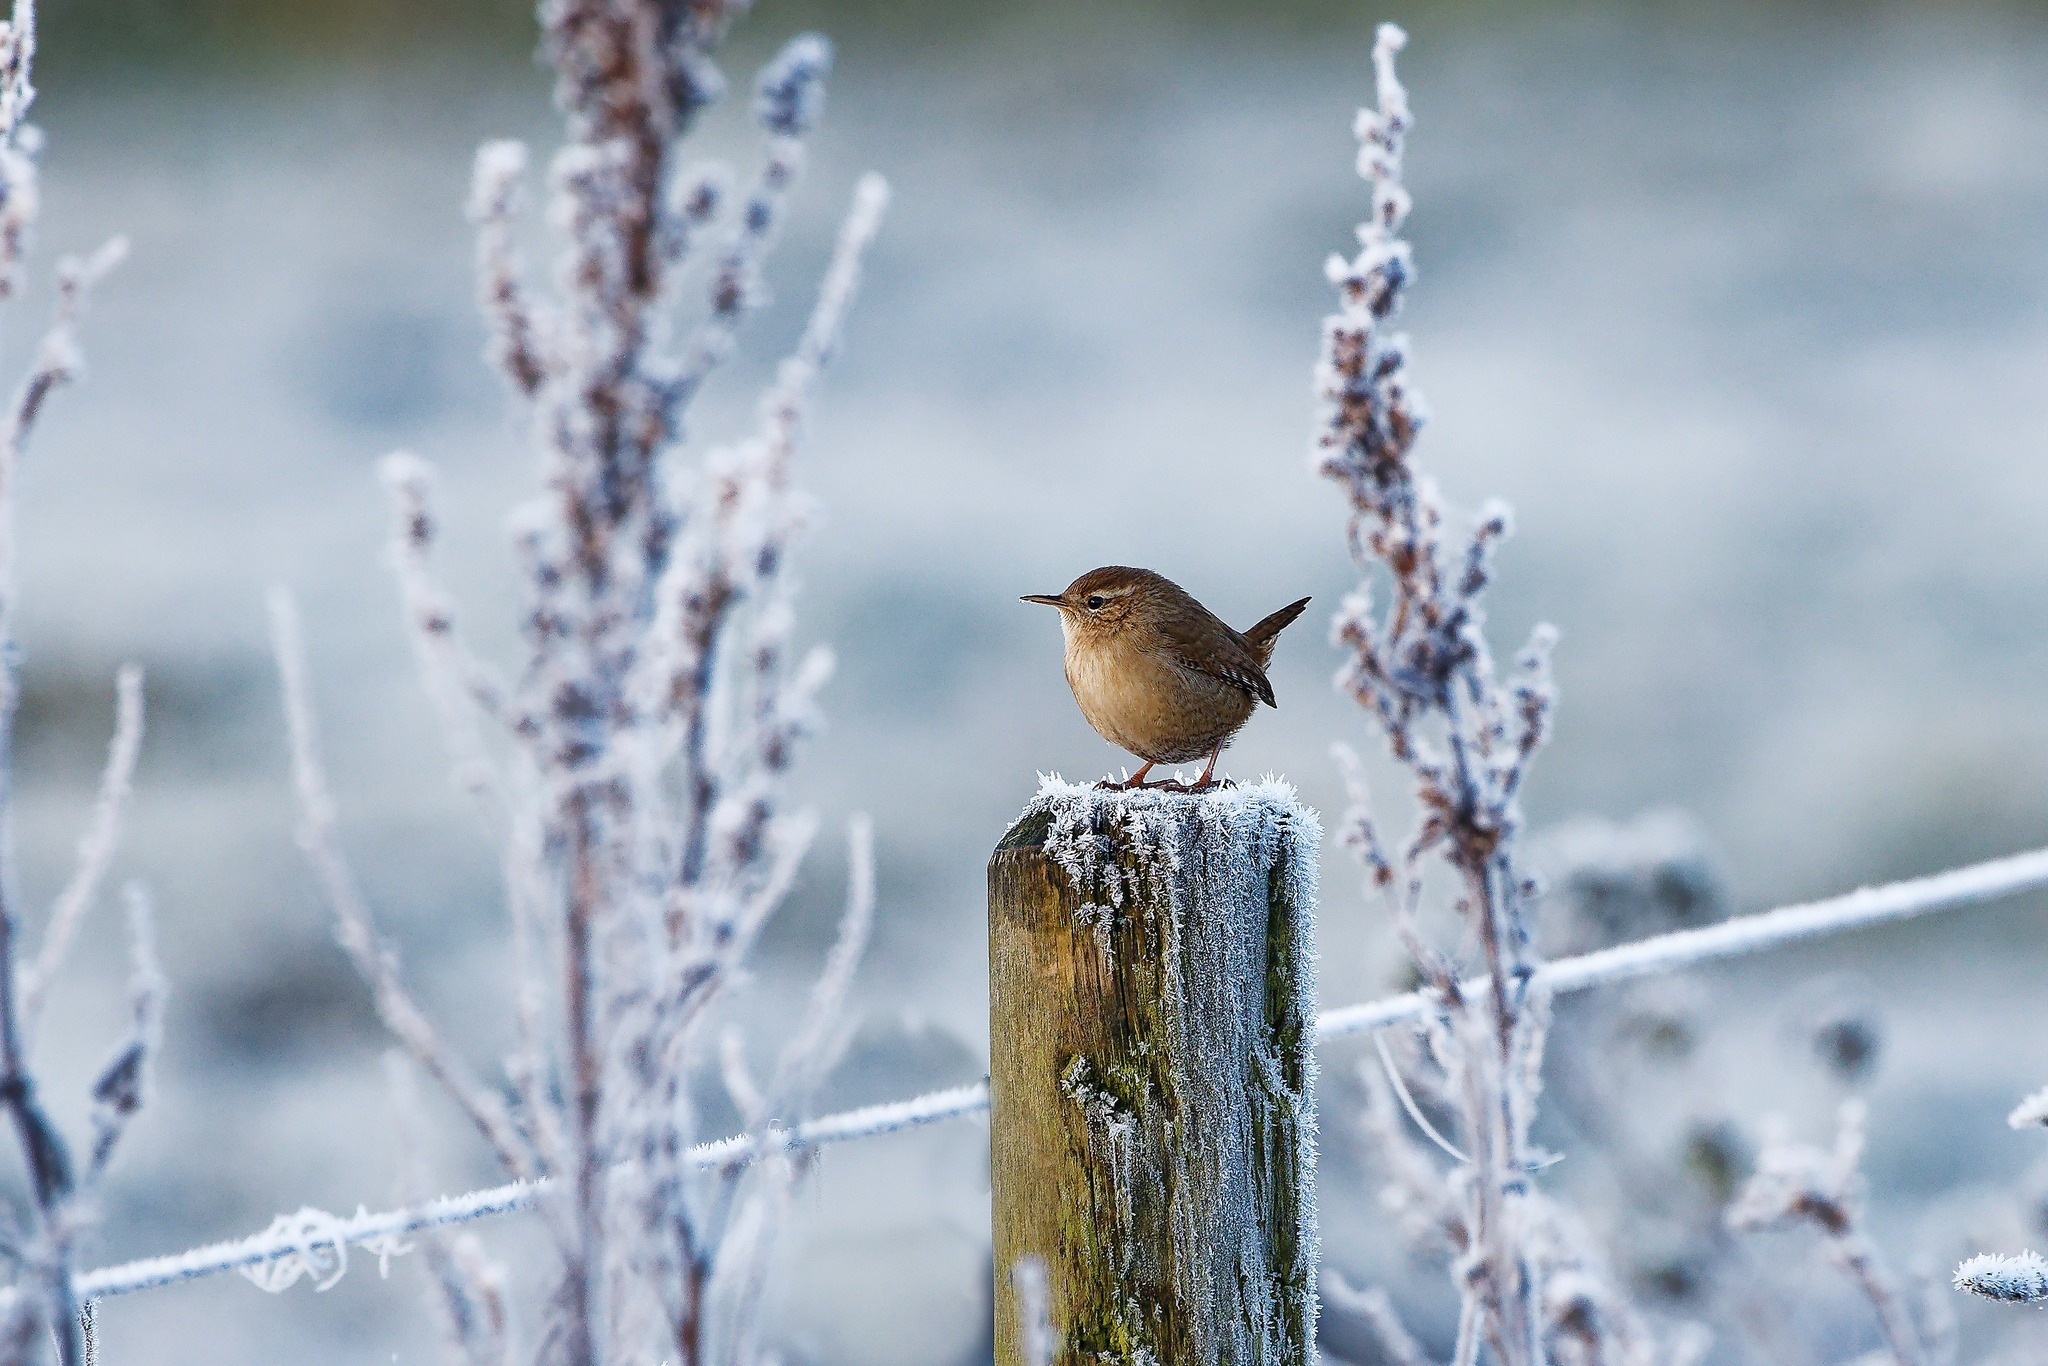 Frosty feathered friend by Cliff Pike